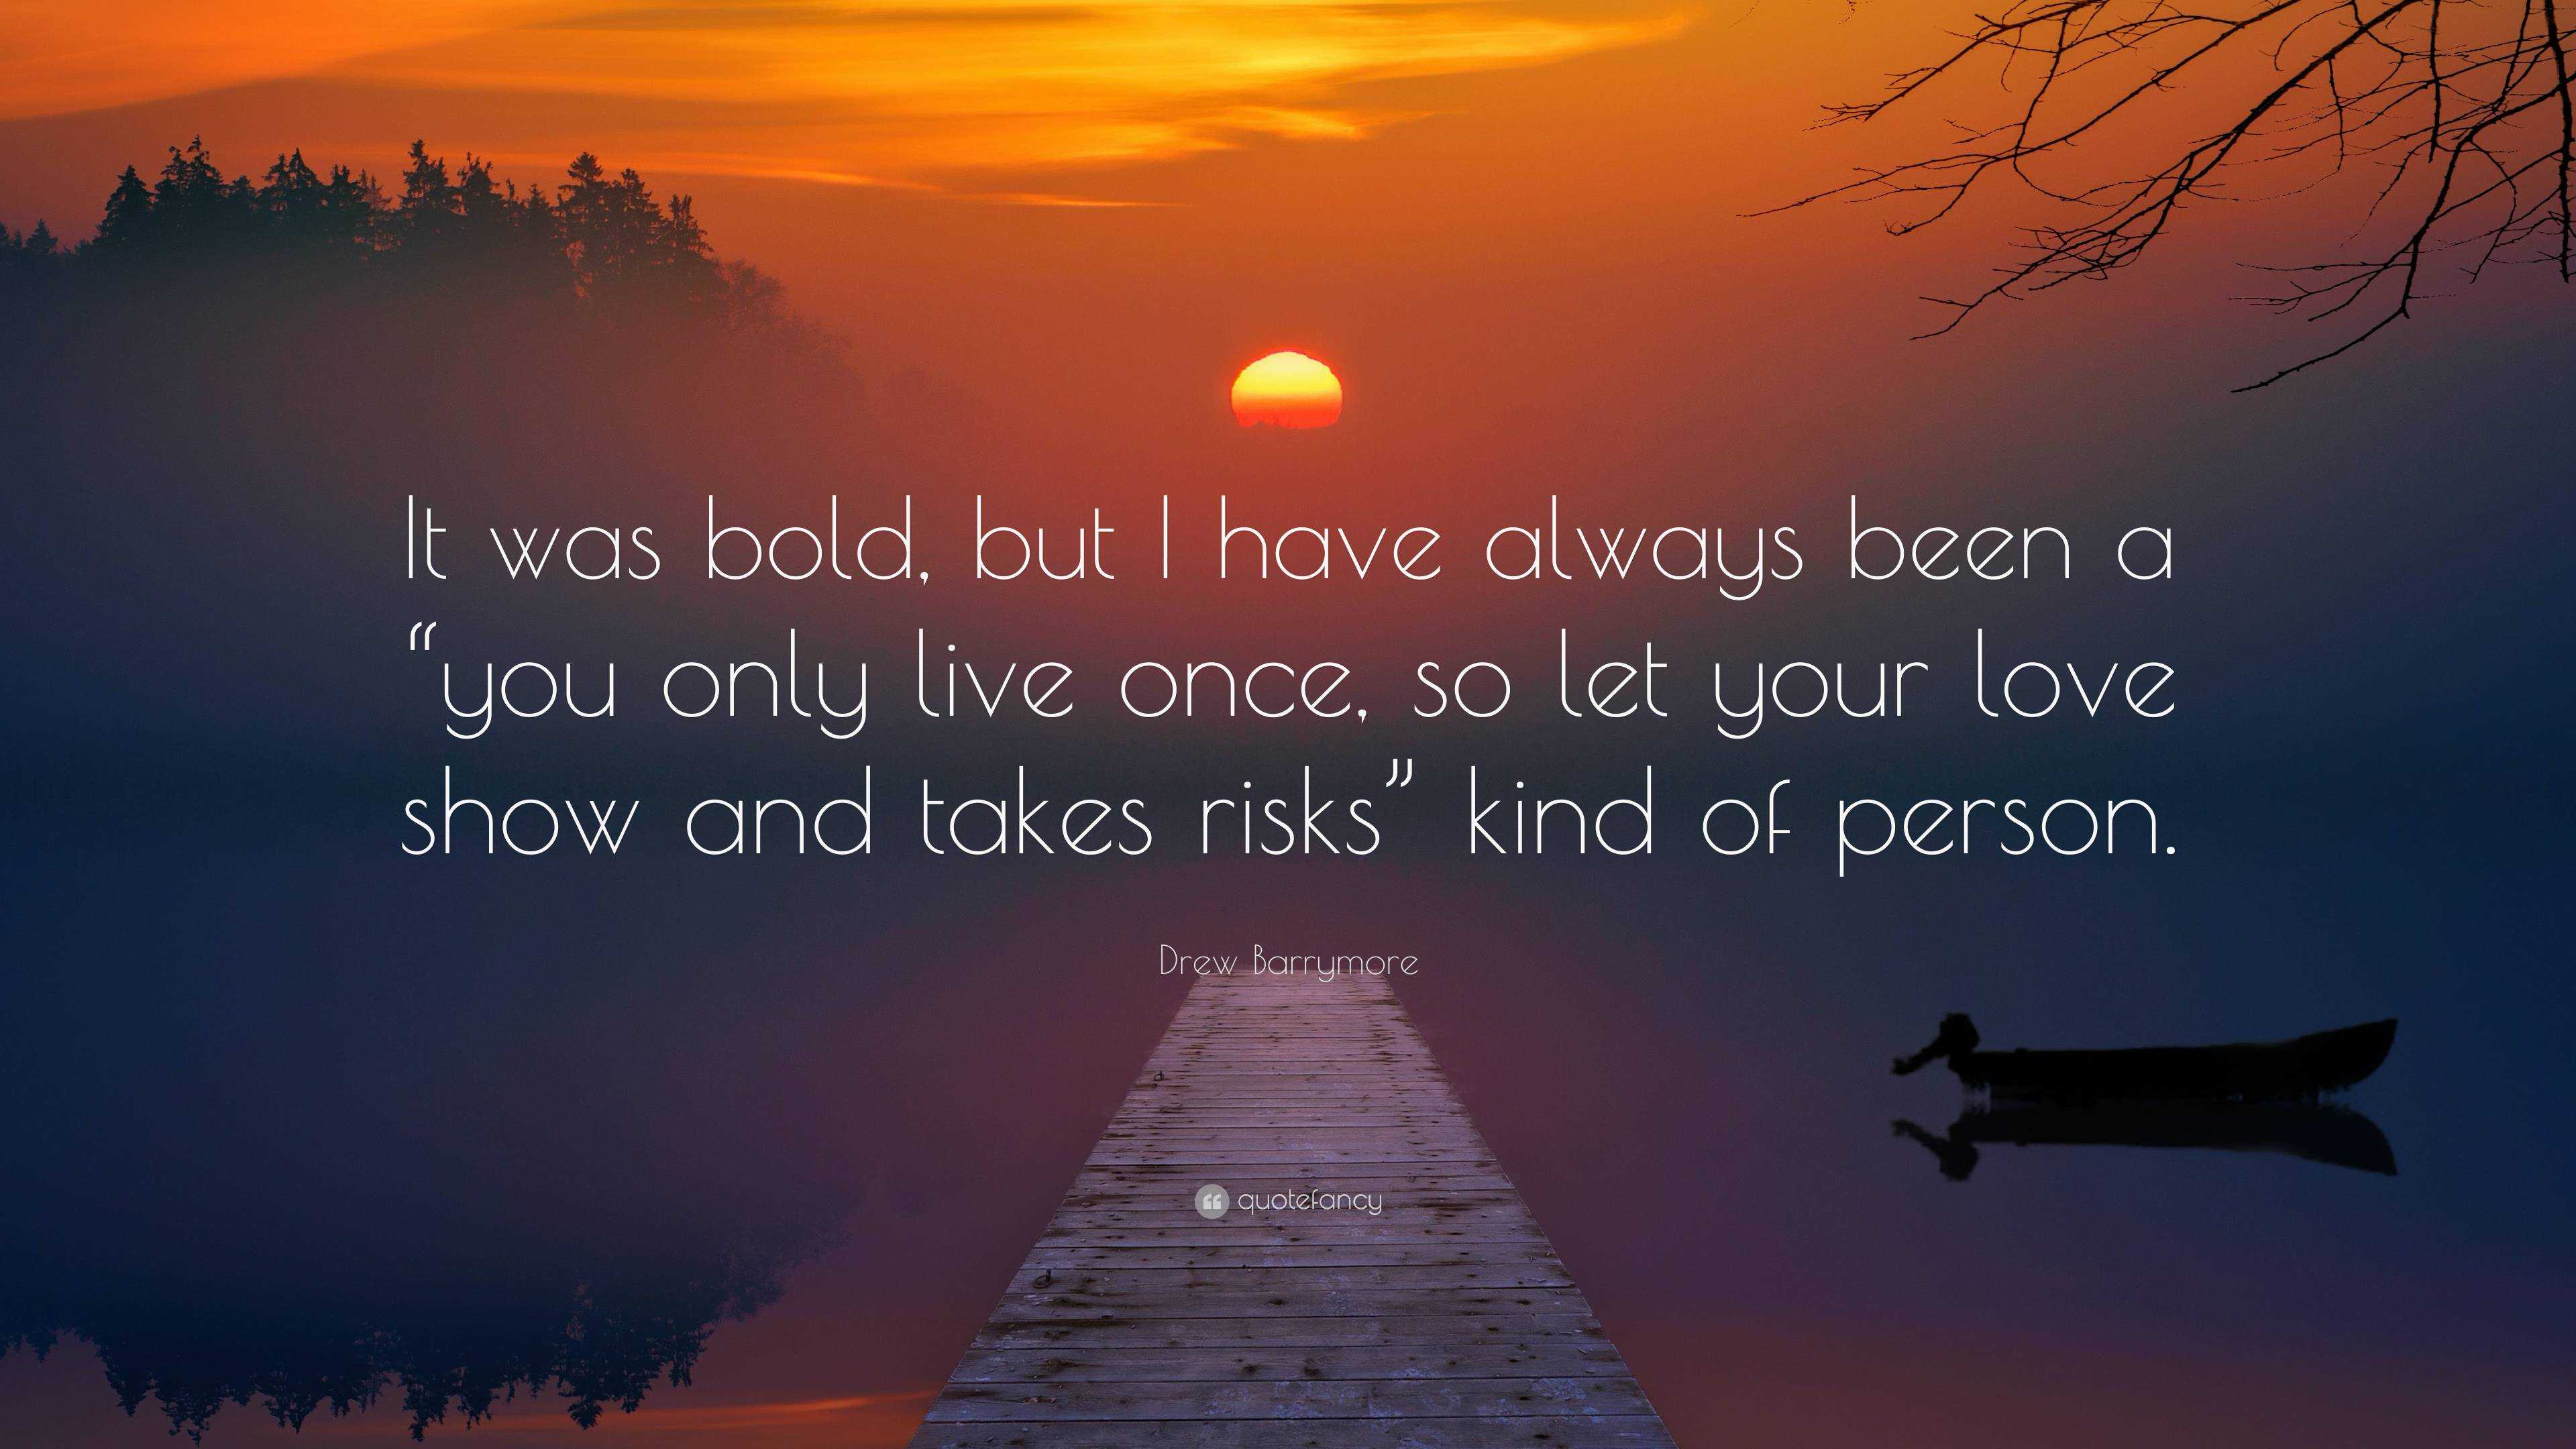 Drew Barrymore Quote: “It was bold, but I have always been a “you only ...